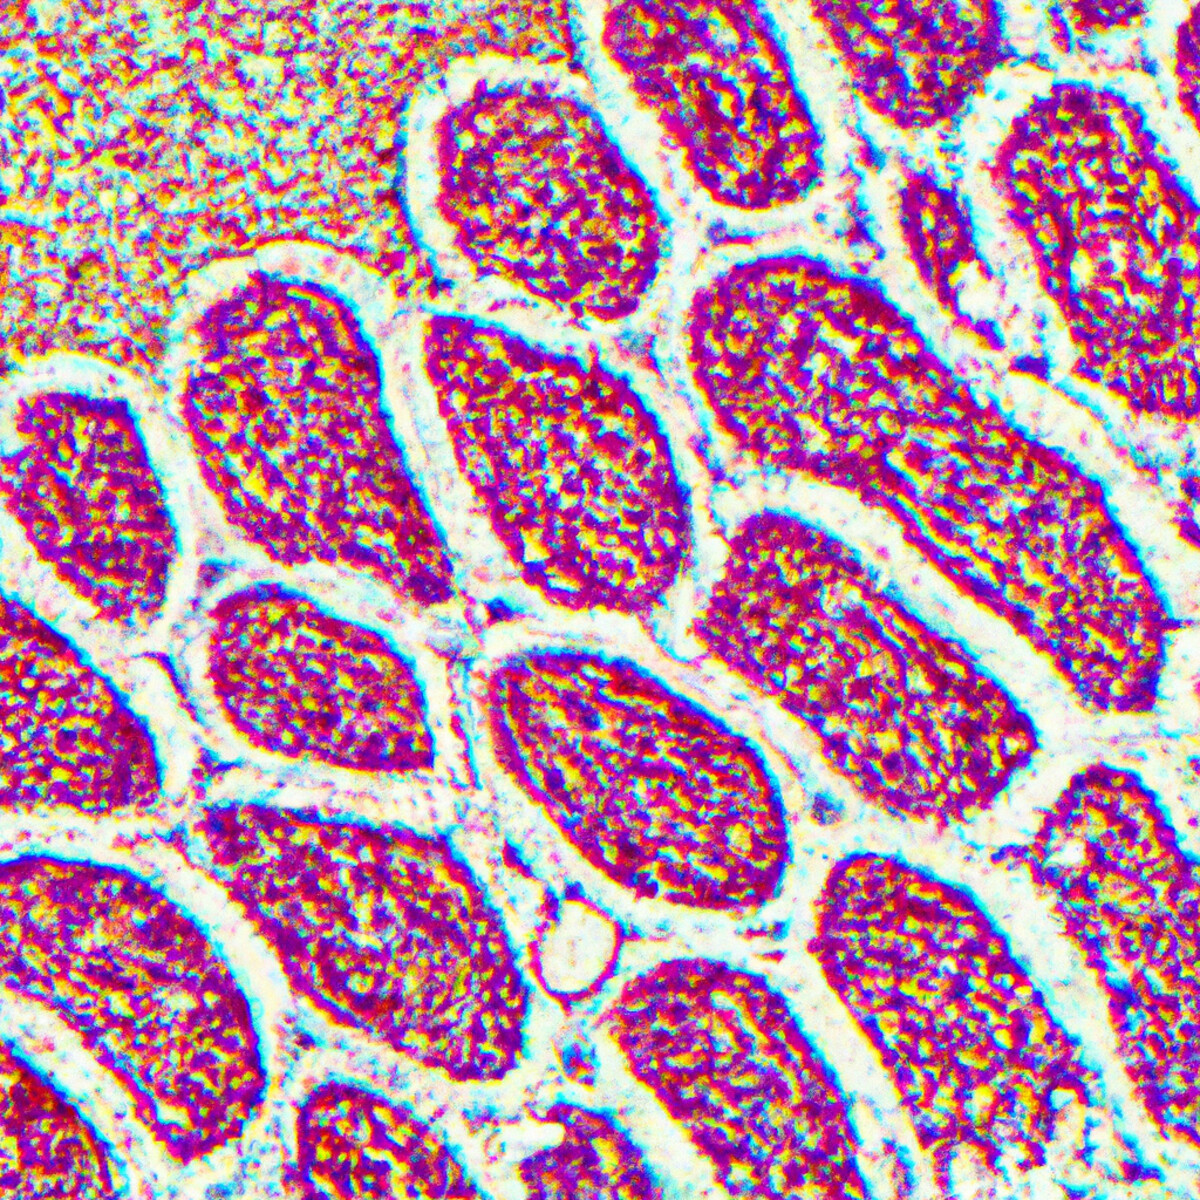 Vibrant close-up of collagen fibers forming dense network, showcasing collagenous gastritis's microscopic characteristics.